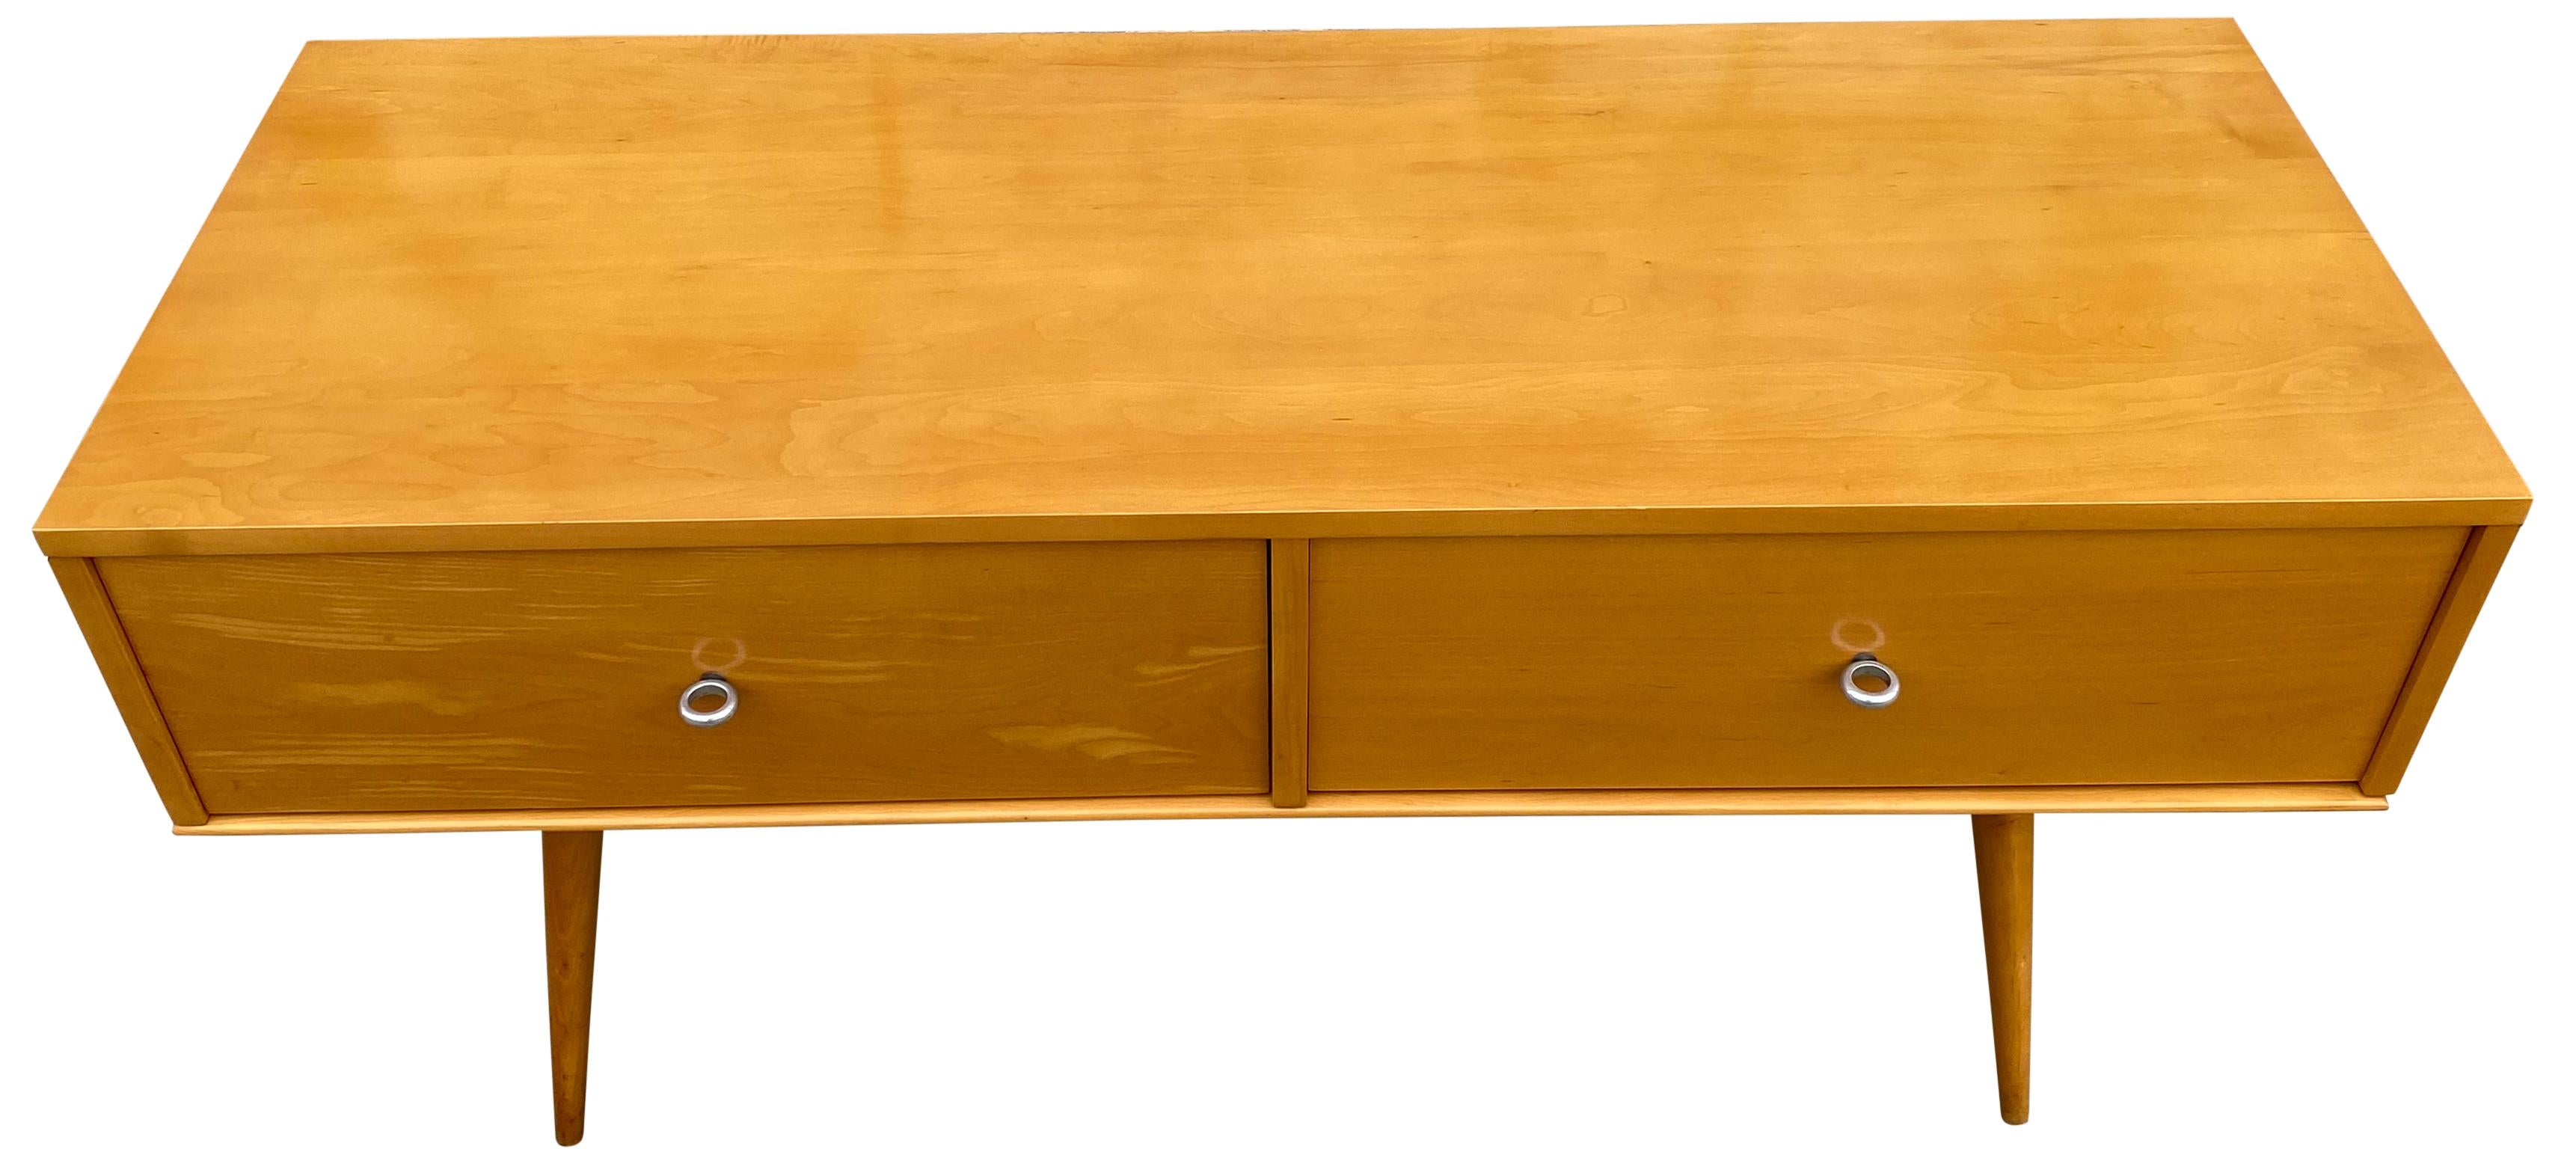 Unique rare custom midcentury low dresser small credenza by Paul McCobb circa 1950 Planner Group with two low drawers - solid maple construction has a raw Blonde lacquered finish. All original aluminum ring pulls. Sits on maple table base with 4